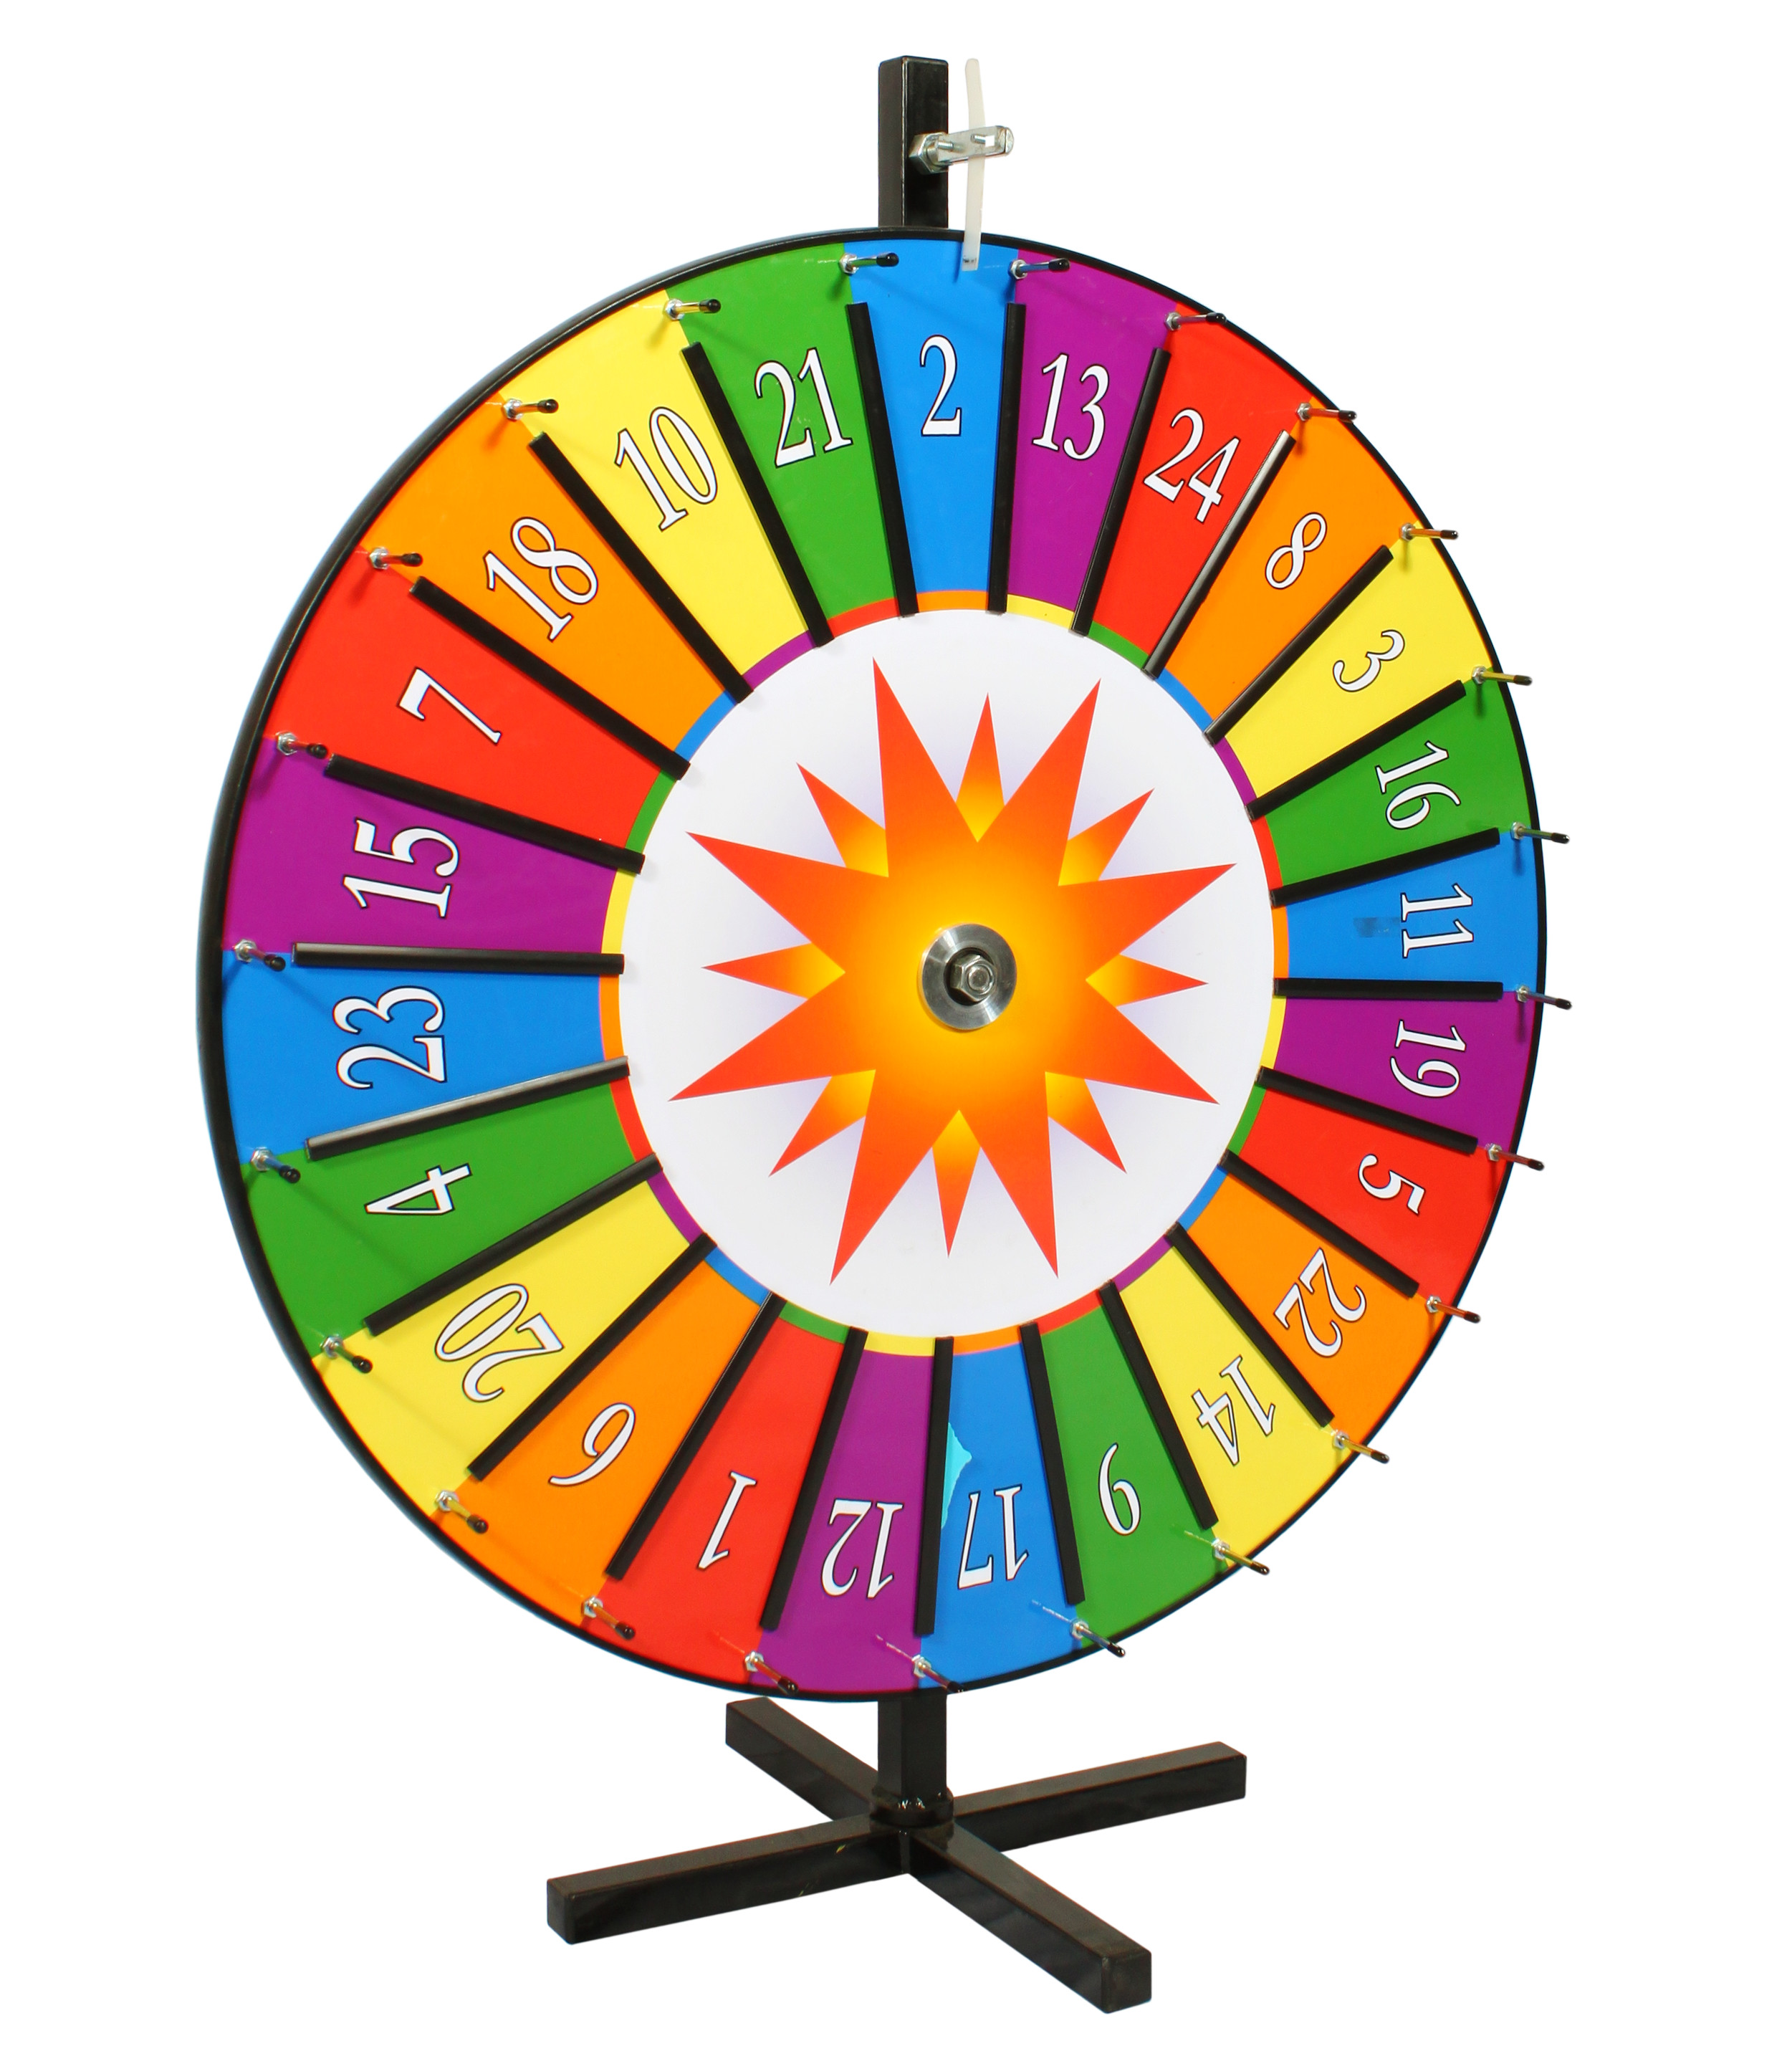 1m diameter Big Prize Wheel, Lucky Spin, Roulette Wheel